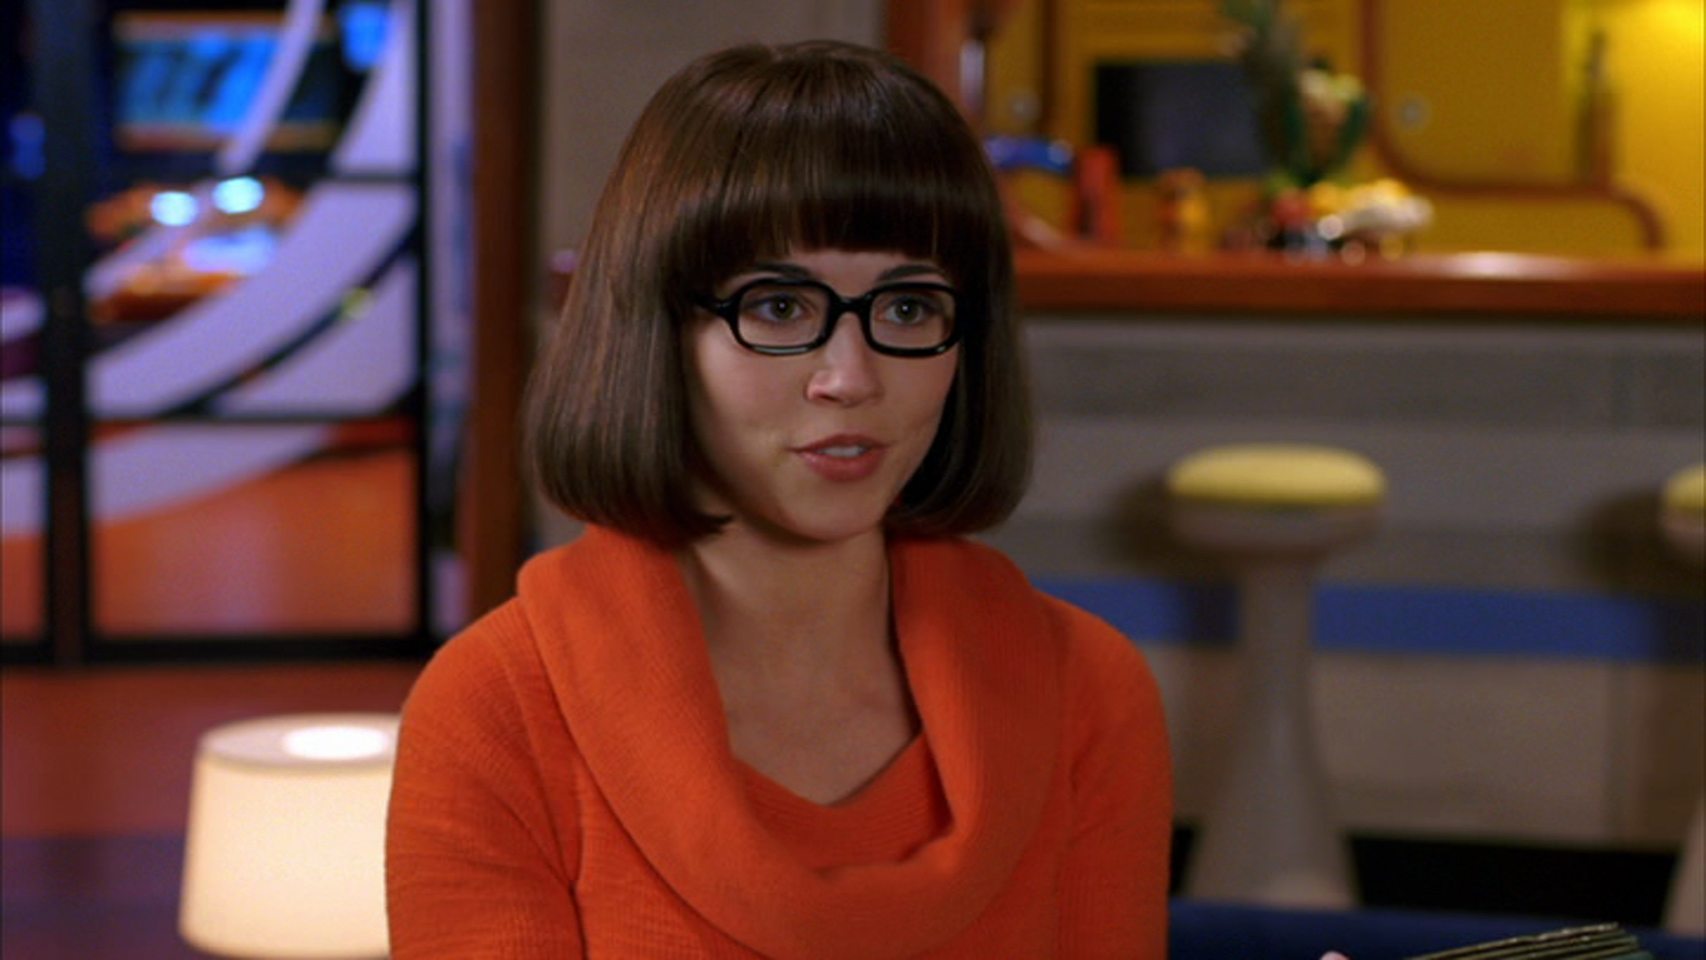 23 Pictures Of Girls Dressing Up As Velma From Scooby Doo Gallery 